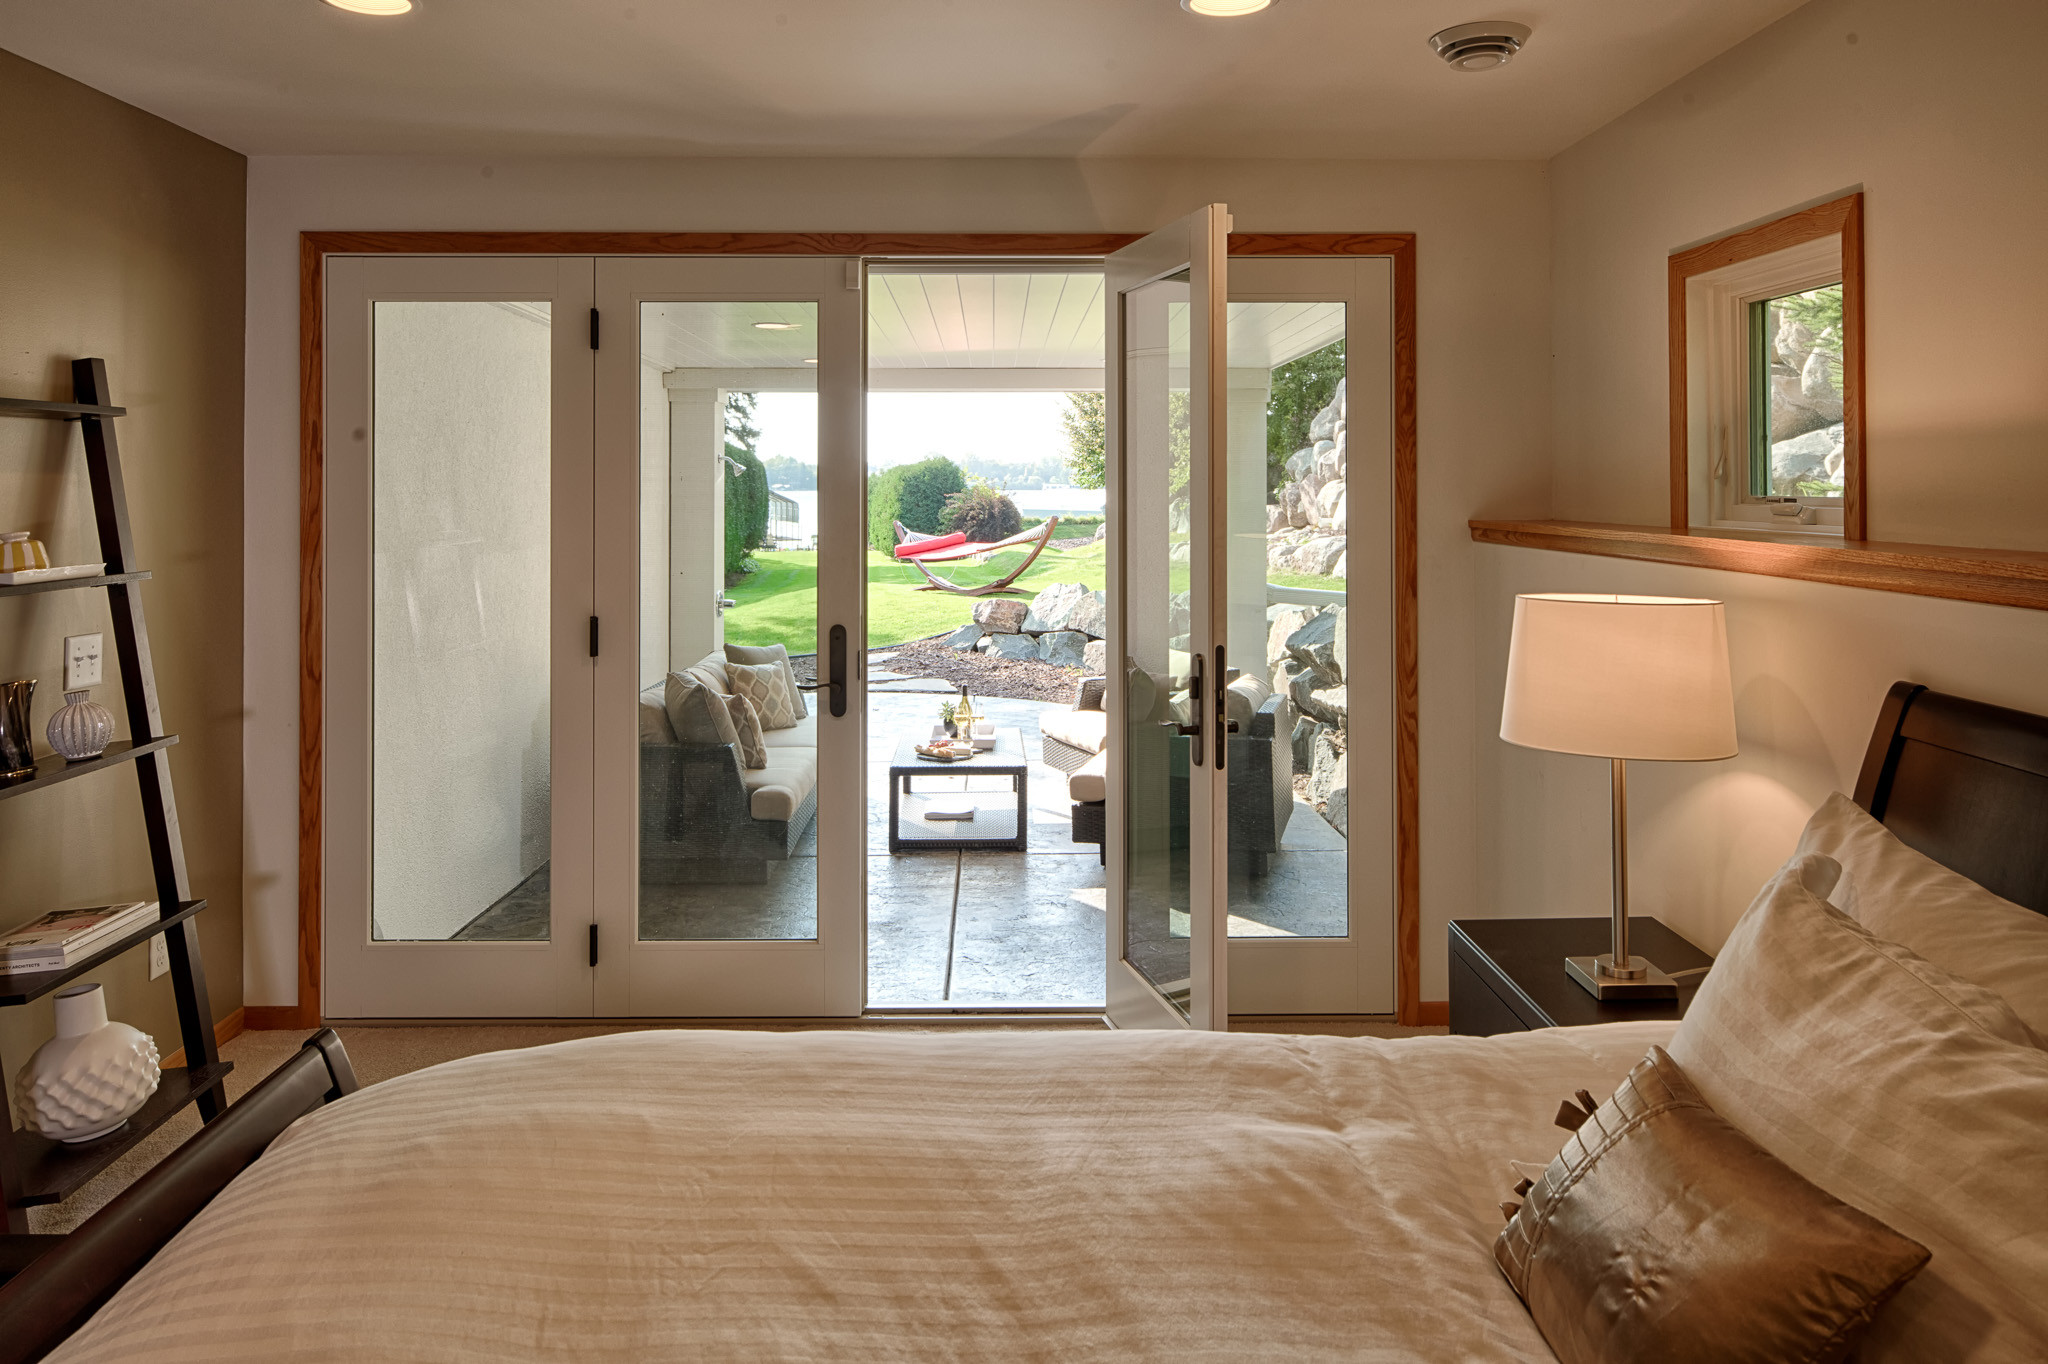 Contemporary Home Remodel - Downstairs Bedroom - Doors open to outside patio